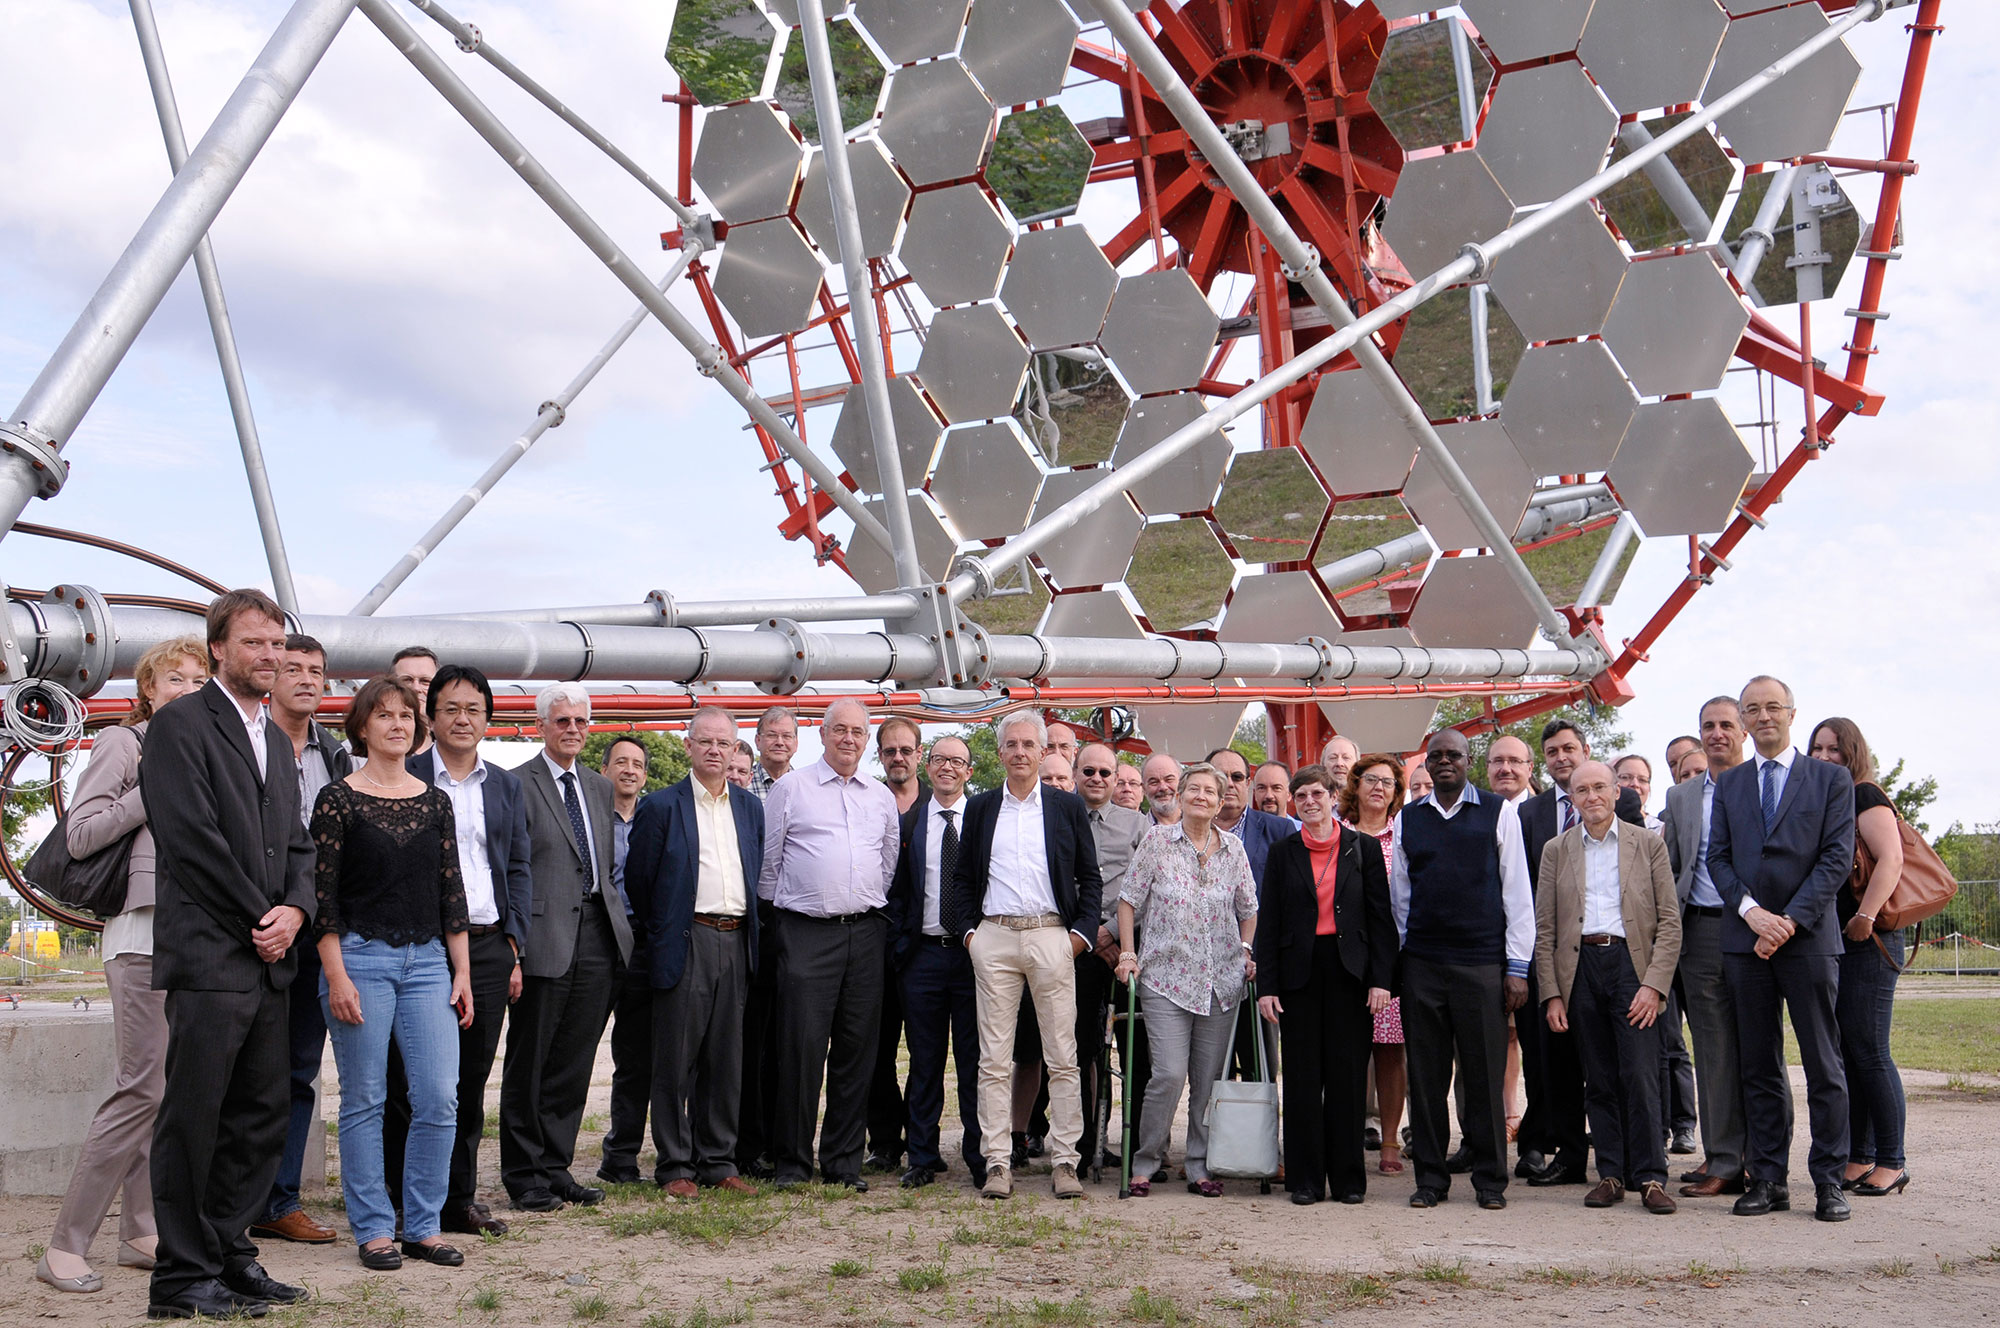 Spain and Chile Chosen to Host γ-ray Telescope